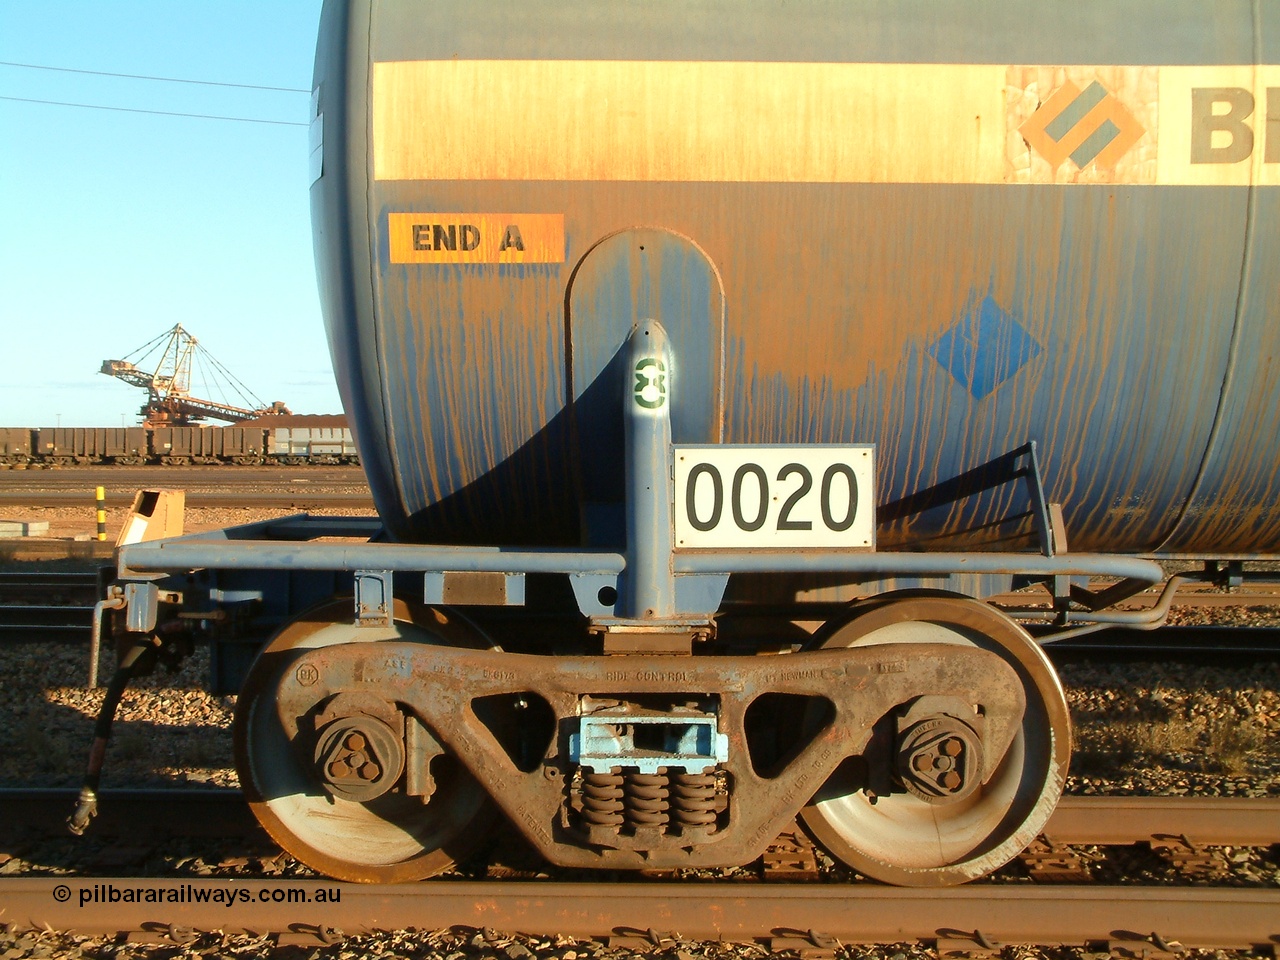 040815 171406
Nelson Point, side view of A end and bogie detail view of fuel tank waggon 0020, 82 kilolitre capacity built by Comeng NSW for BP as RTC 2, used by Mt Newman Mining, unsure when converted to 0020.
Keywords: Comeng-NSW;RTC2;BHP-tank-waggon;